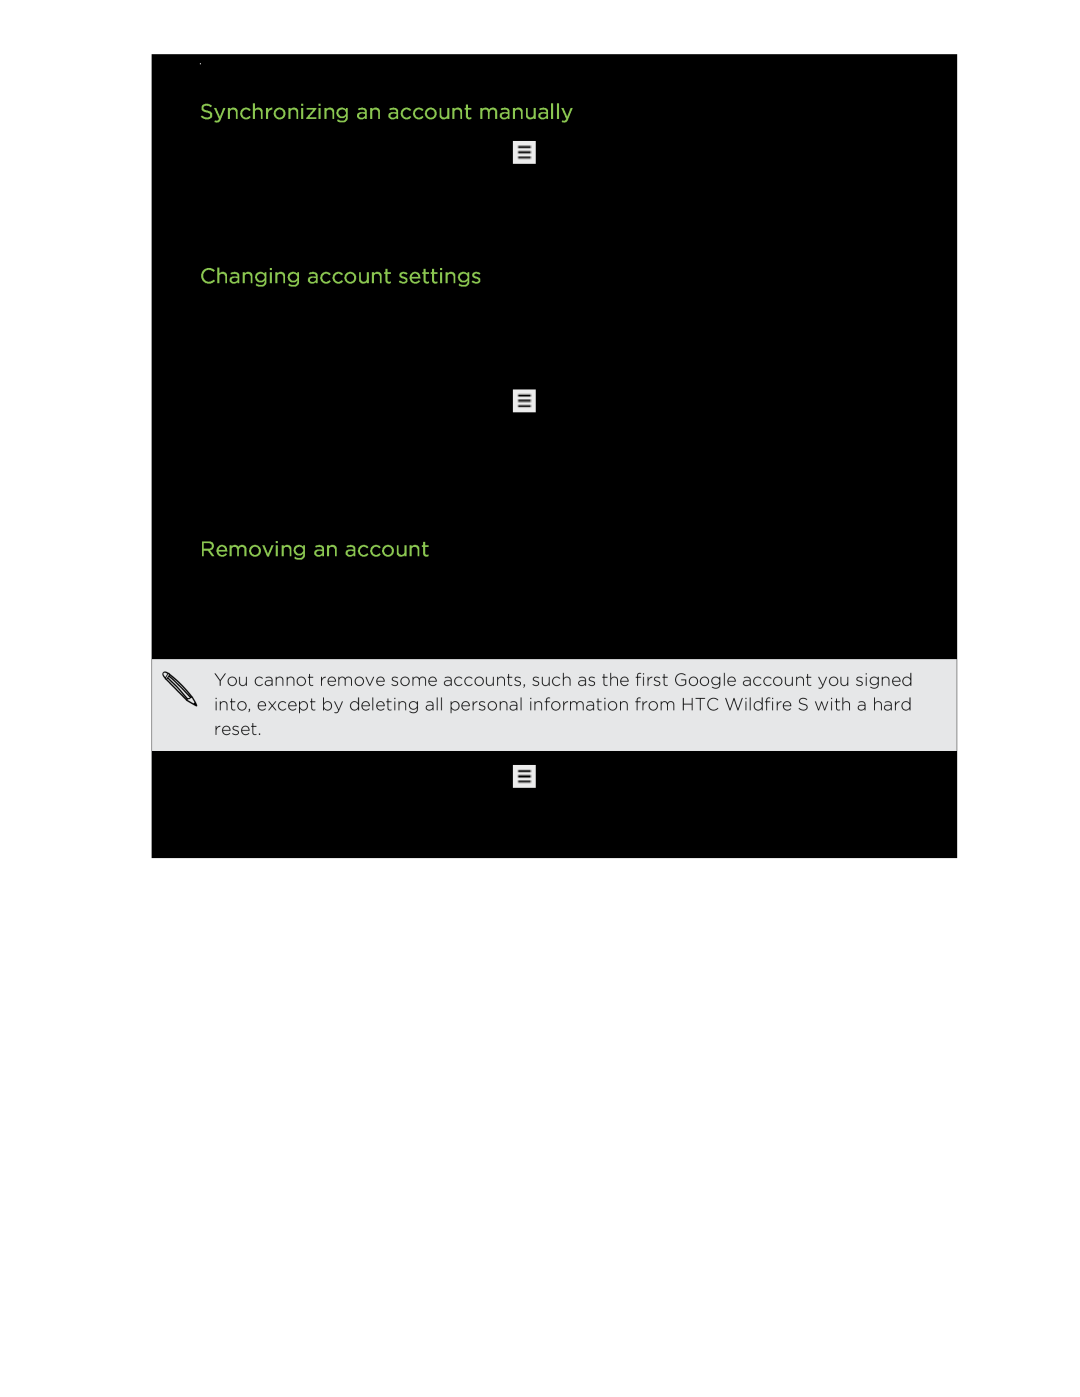 HTC Synchronizing an account manually, Changing account settings, Removing an account, Accounts and sync 